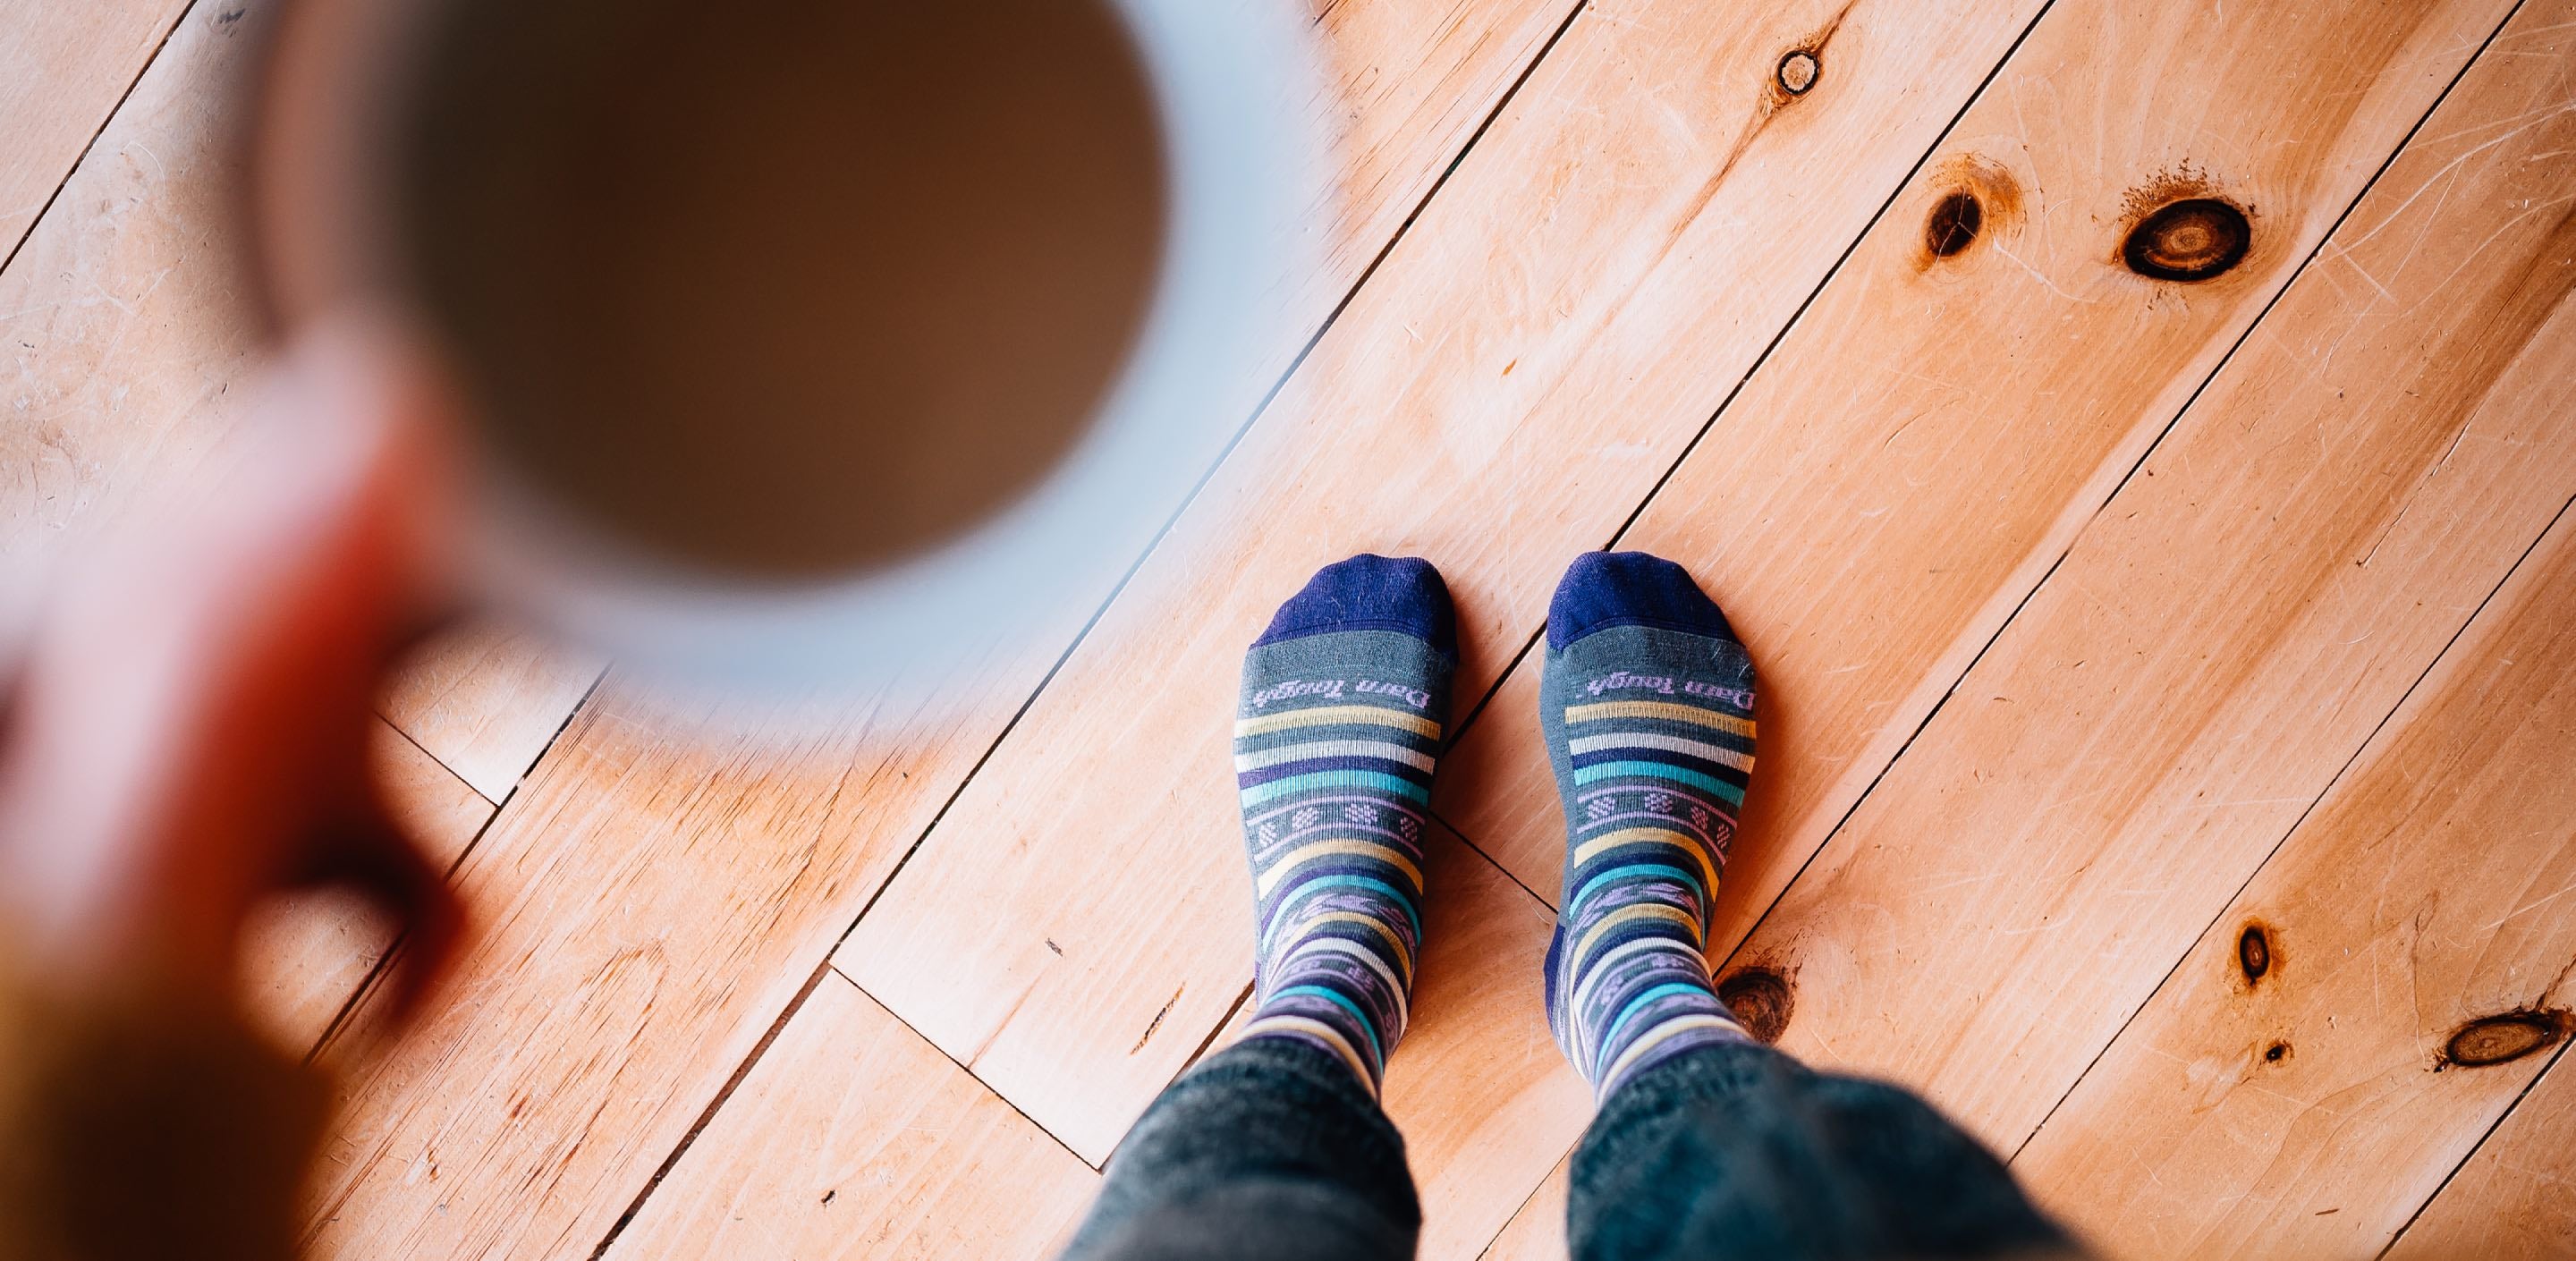 Person wearing Bronwyn lifestyle socks on a wood floor holding a cup of coffee